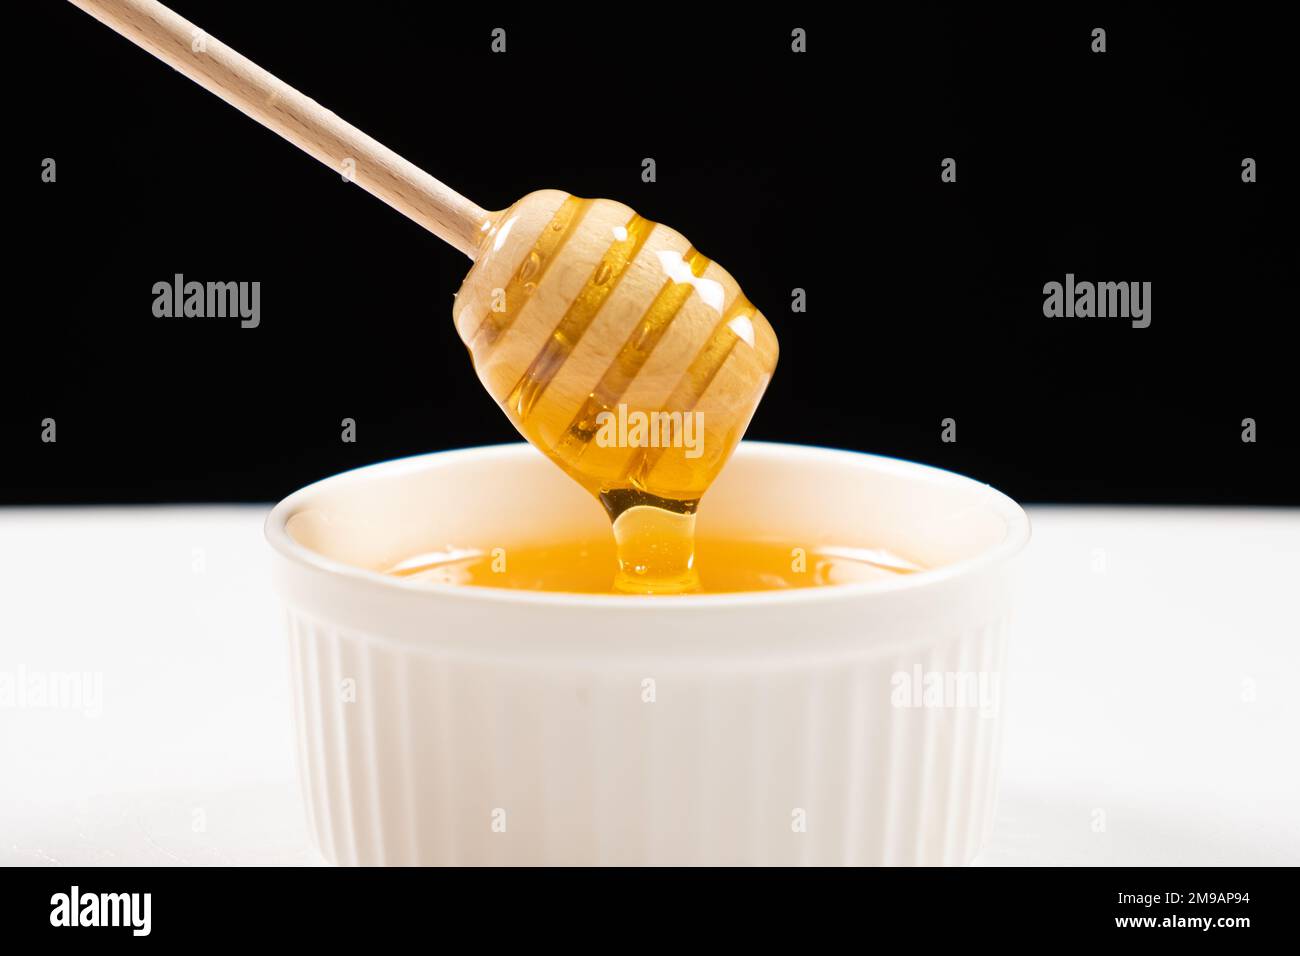 Honey in a white ceramic bowl with a wooden spoon on a black background. Stock Photo